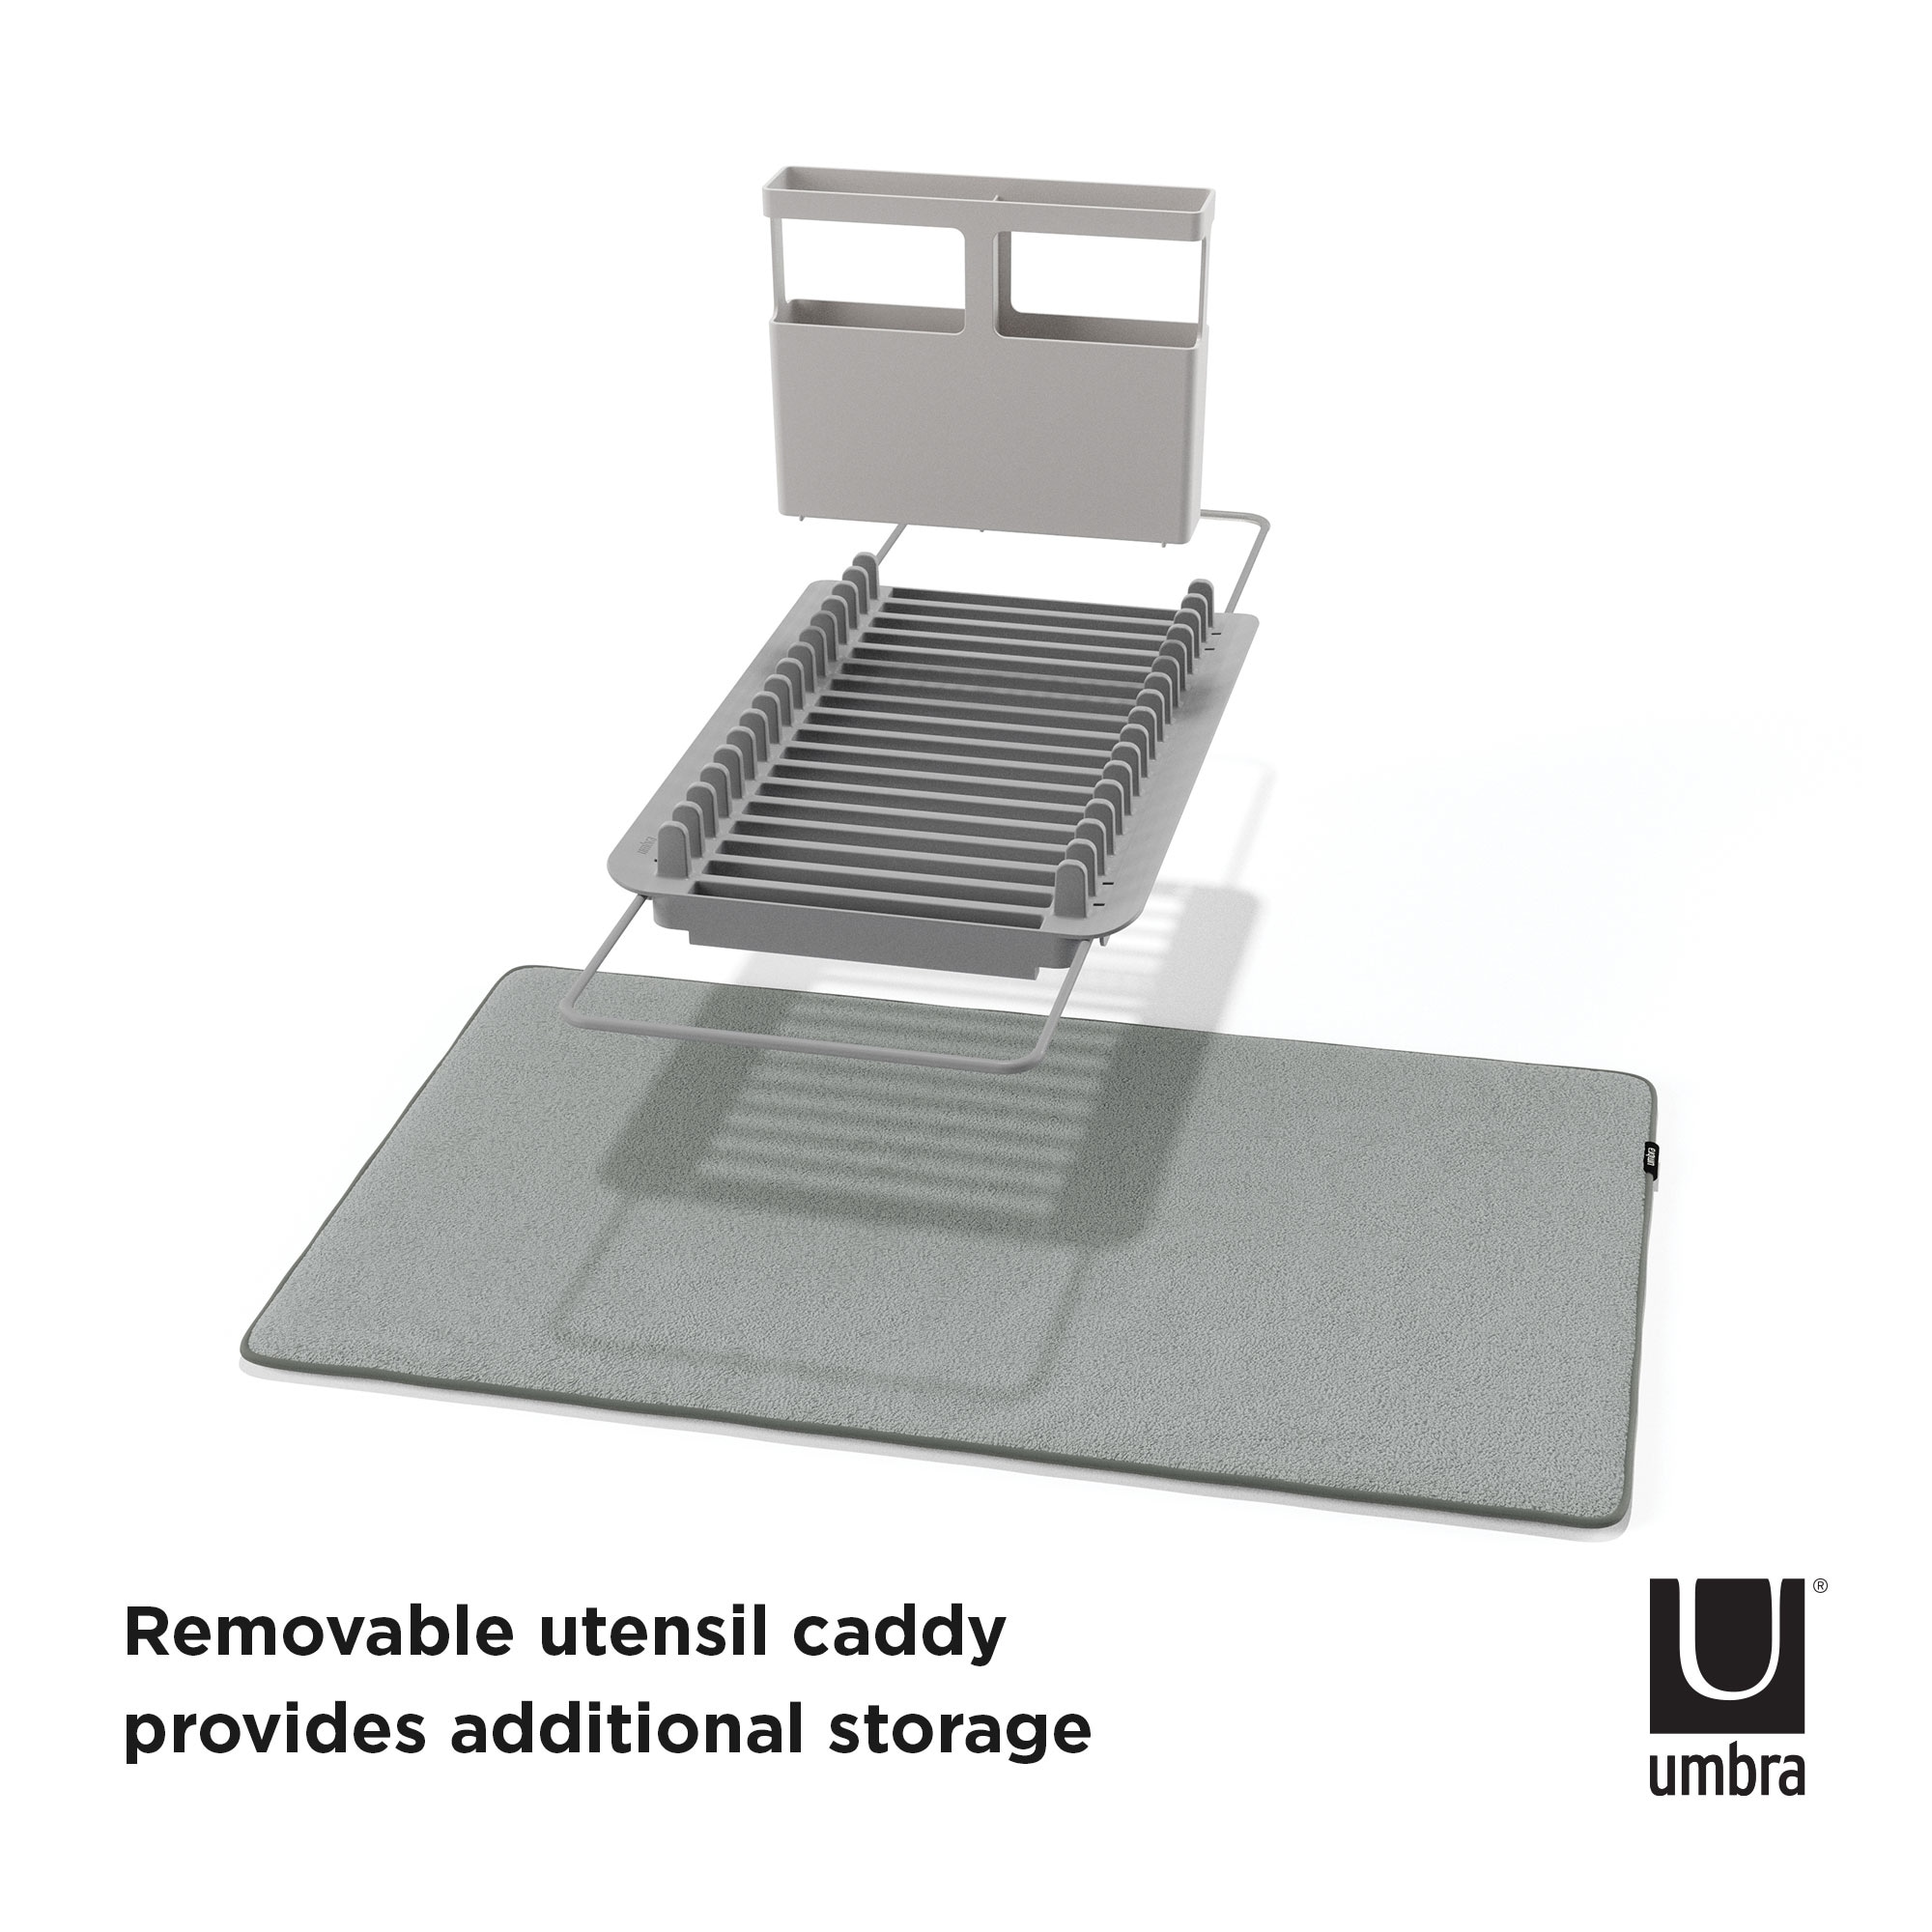 Umbra UDry Peg Drying Rack with Mat